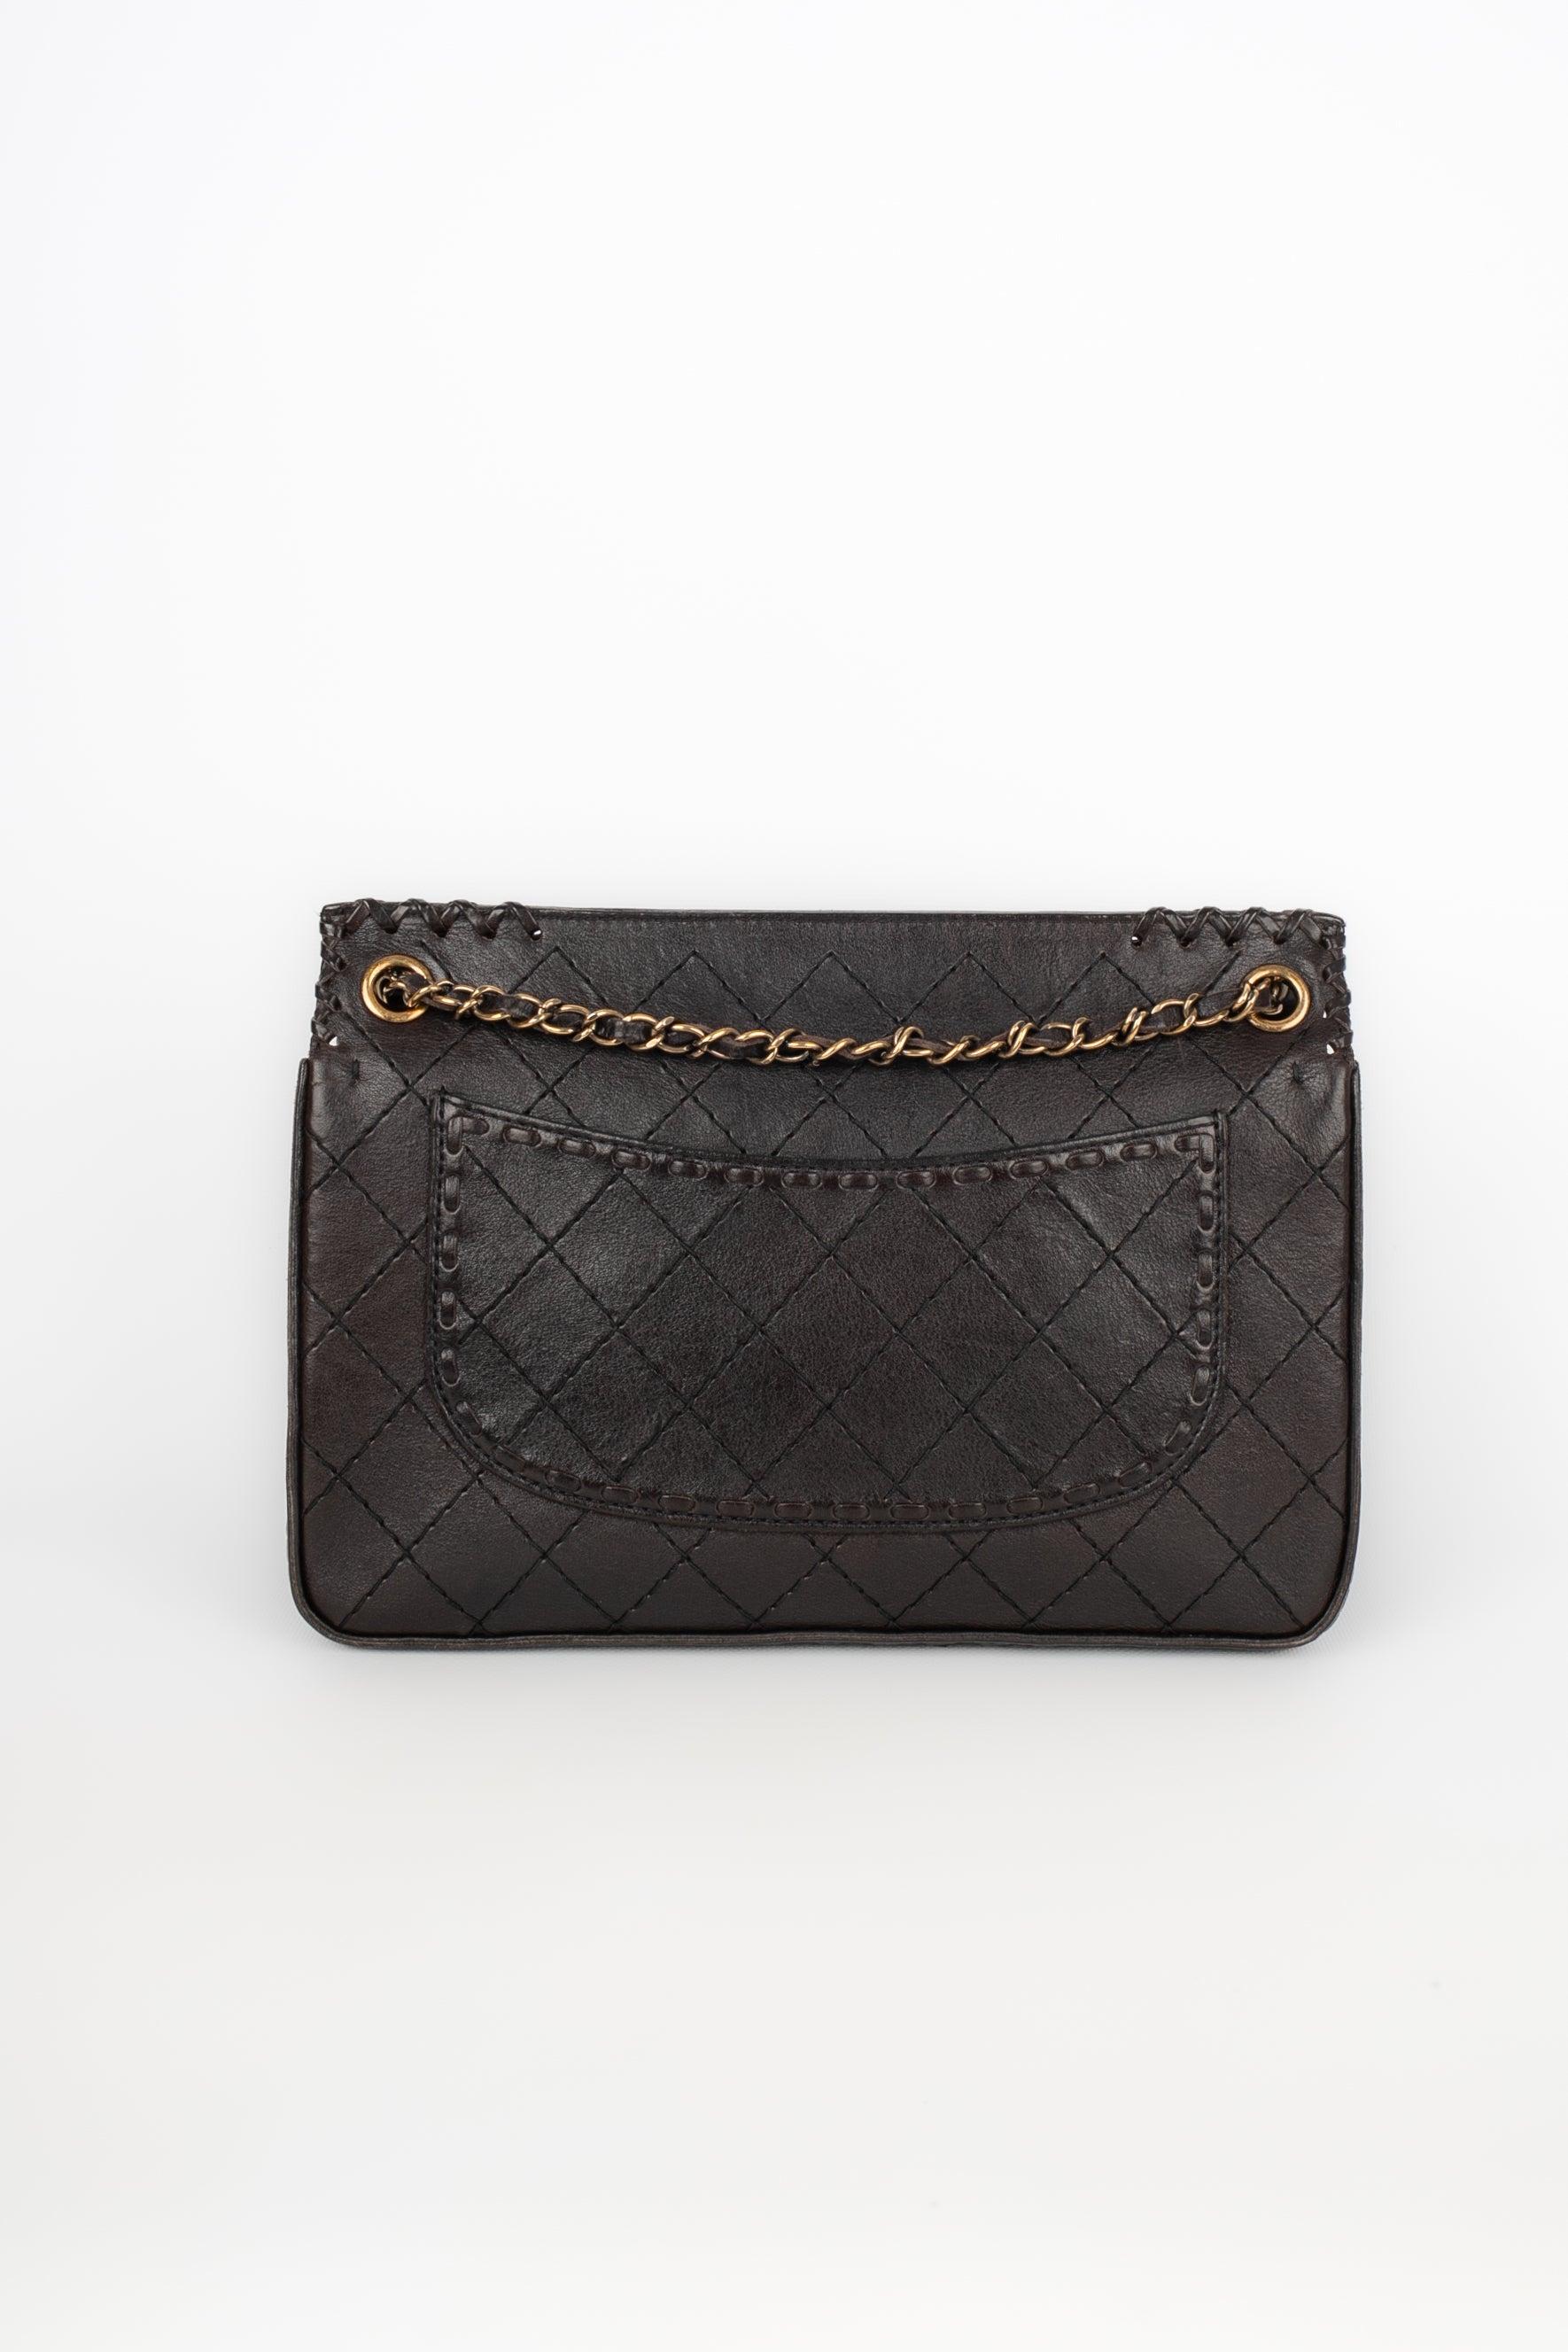 Chanel Timeless Quilted Leather Bag, 2013/2014 In Excellent Condition For Sale In SAINT-OUEN-SUR-SEINE, FR